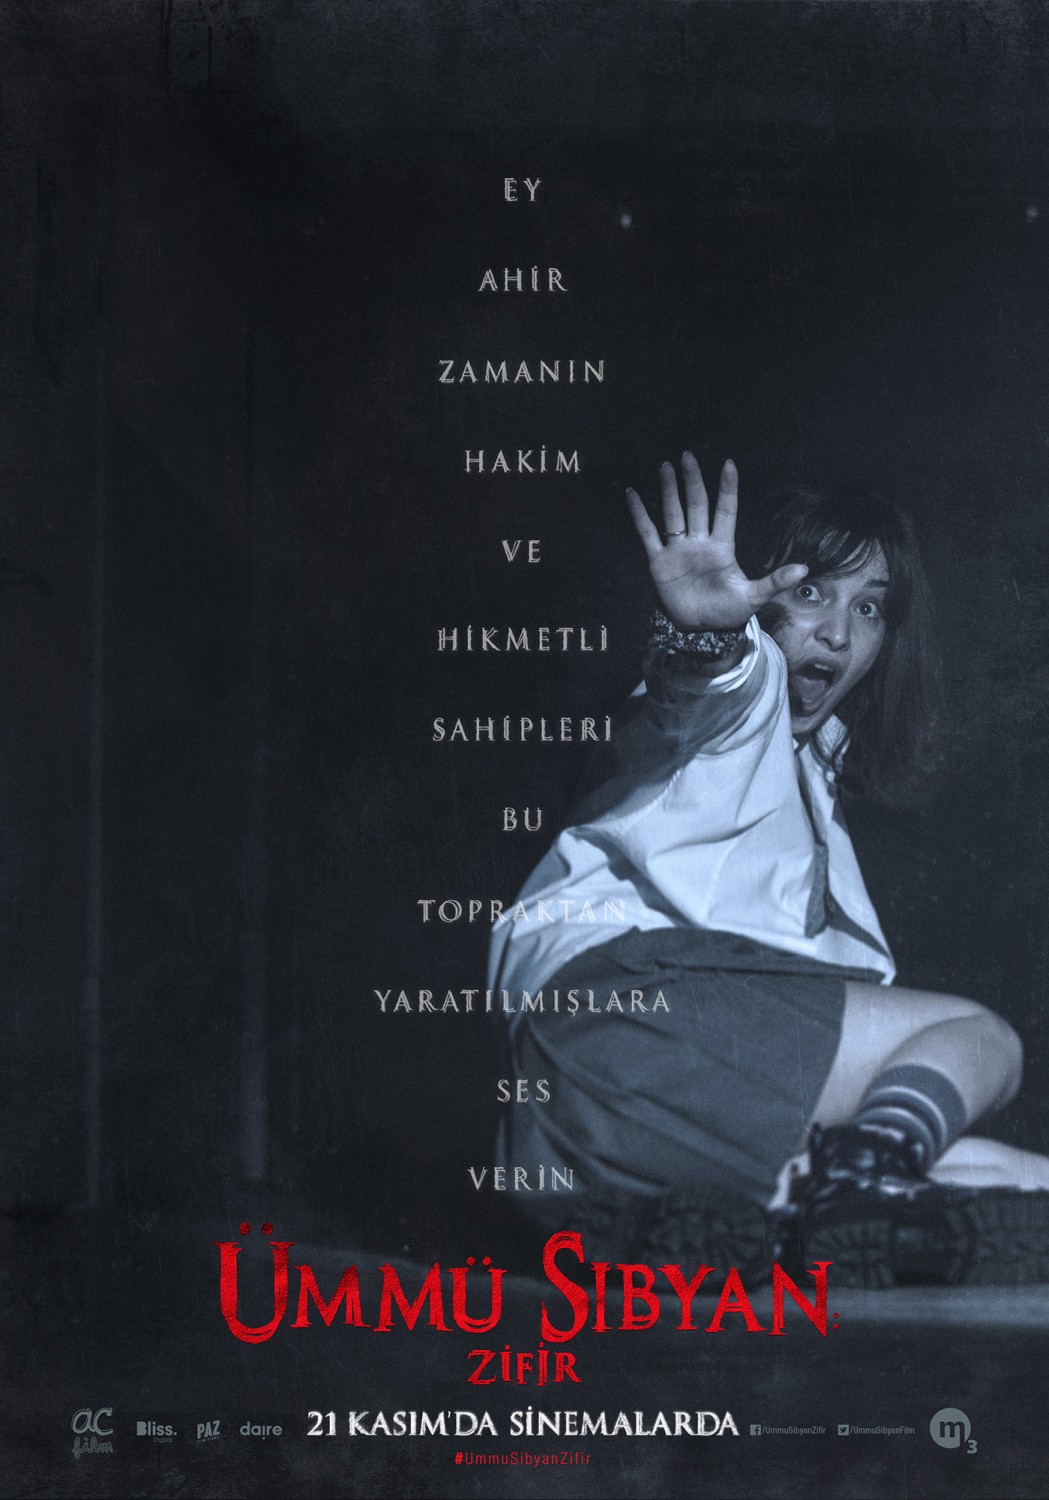 Extra Large Movie Poster Image for Ümmü Sıbyan Zifir (#12 of 12)